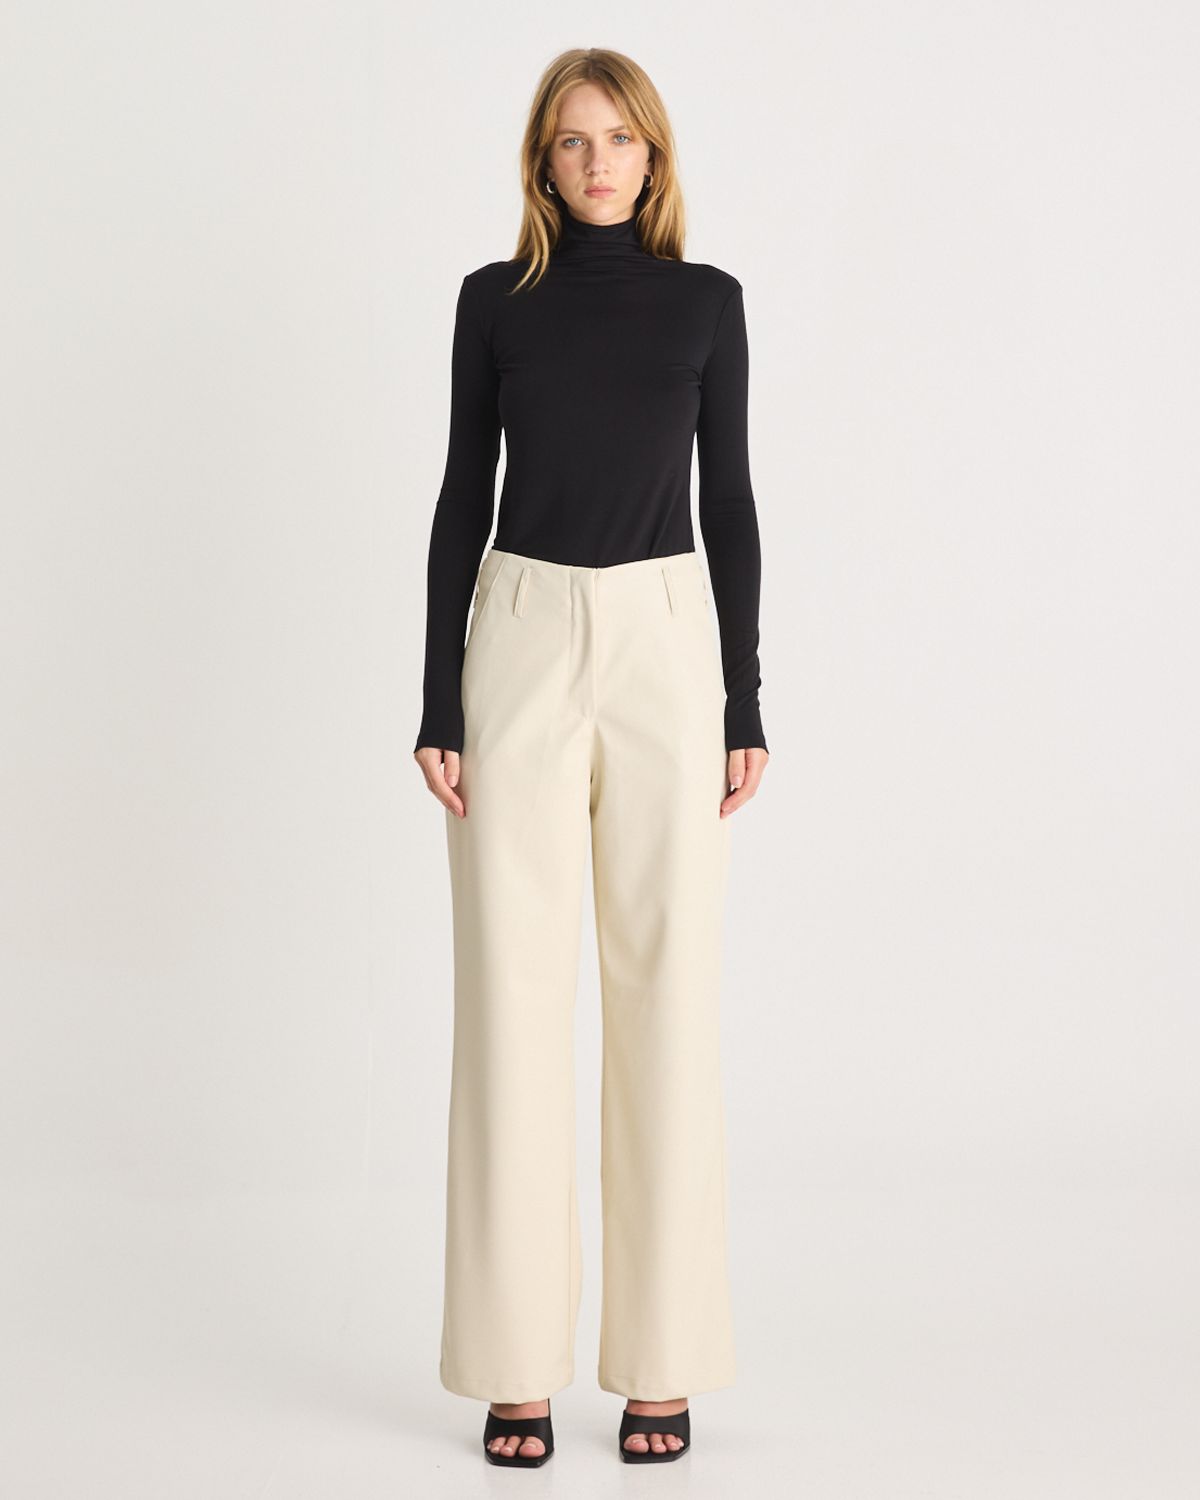 The Vegan Leather Pant are a mid-rise straight leg pant, featuring pockets, belt loops and a hidden clasp closure. They are crafted from a buttery soft Vegan Leather fabrication in Cream. Now available at Romy. 